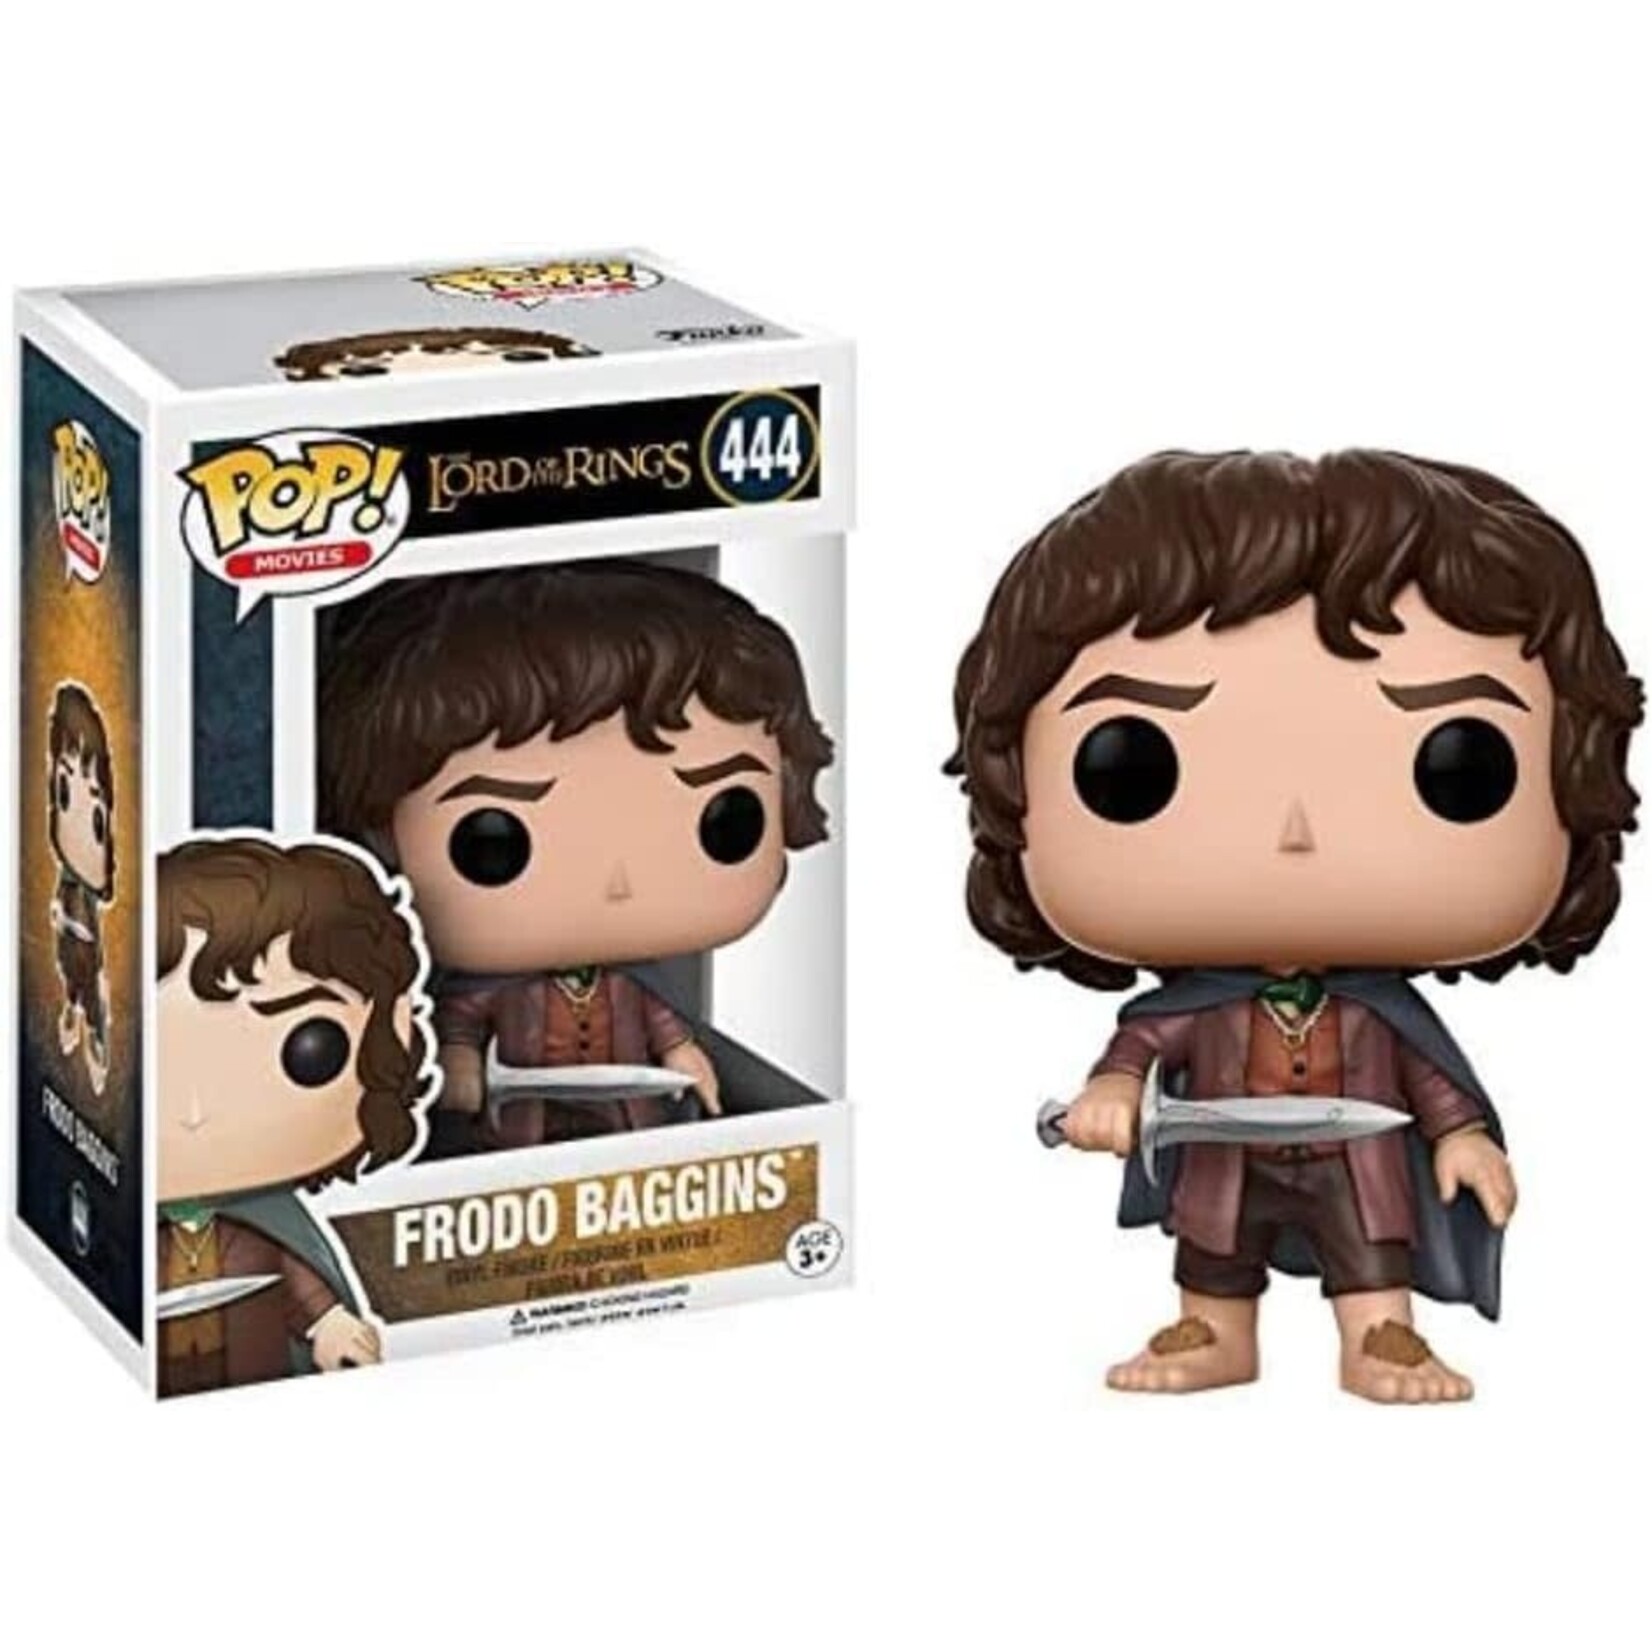 FUNKO The Lord of the Rings Frodo Baggins Pop!  #444